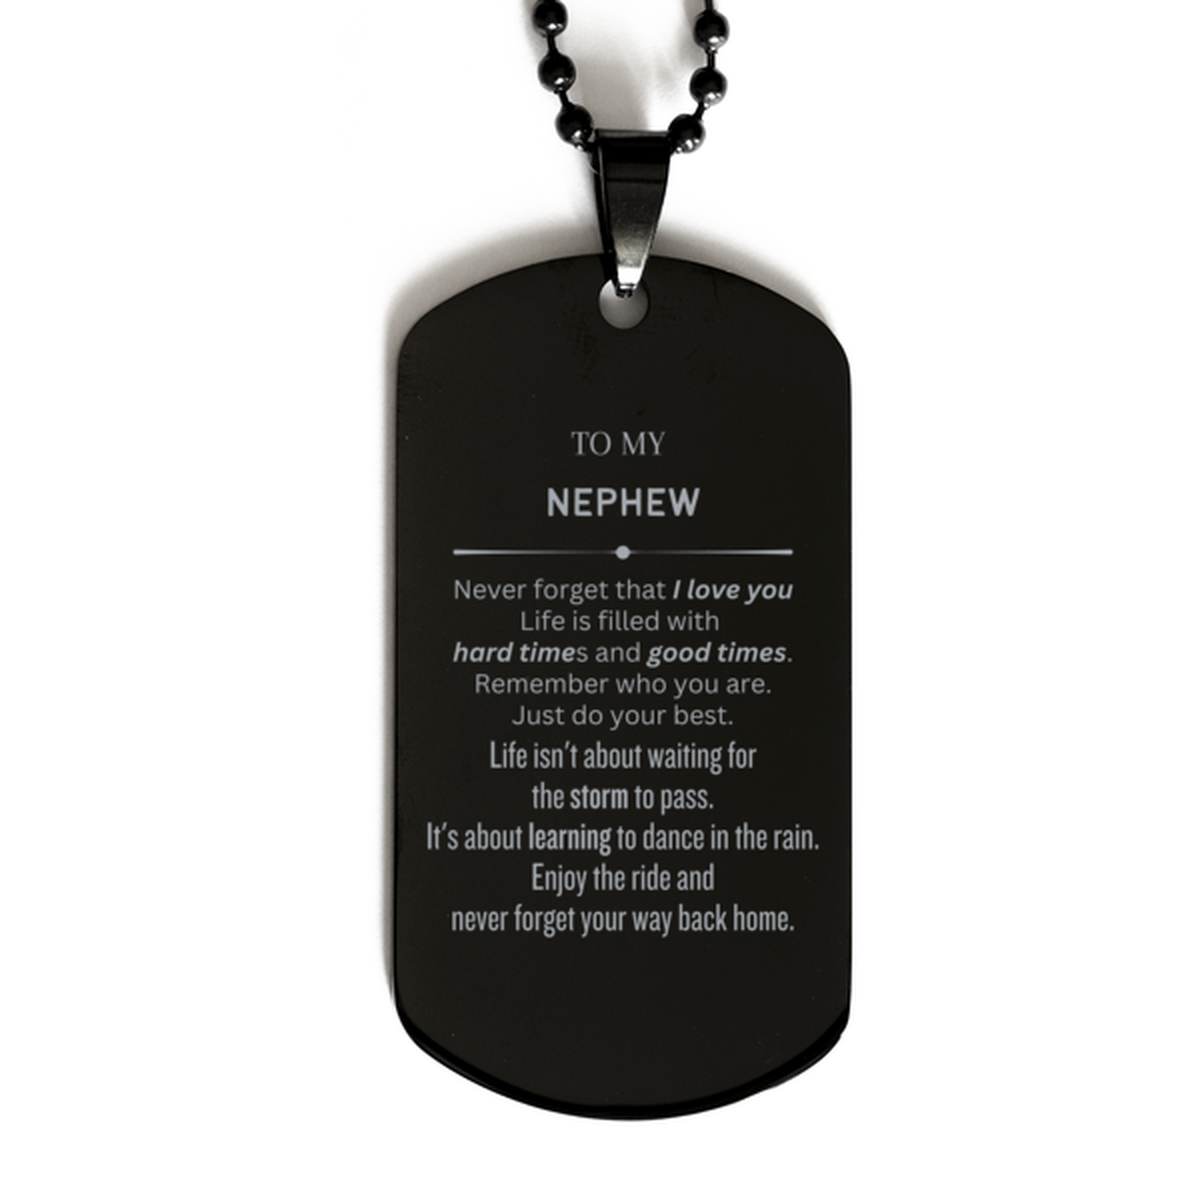 Christmas Nephew Black Dog Tag Gifts, To My Nephew Birthday Thank You Gifts For Nephew, Graduation Unique Gifts For Nephew To My Nephew Never forget that I love you life is filled with hard times and good times. Remember who you are. Just do your best